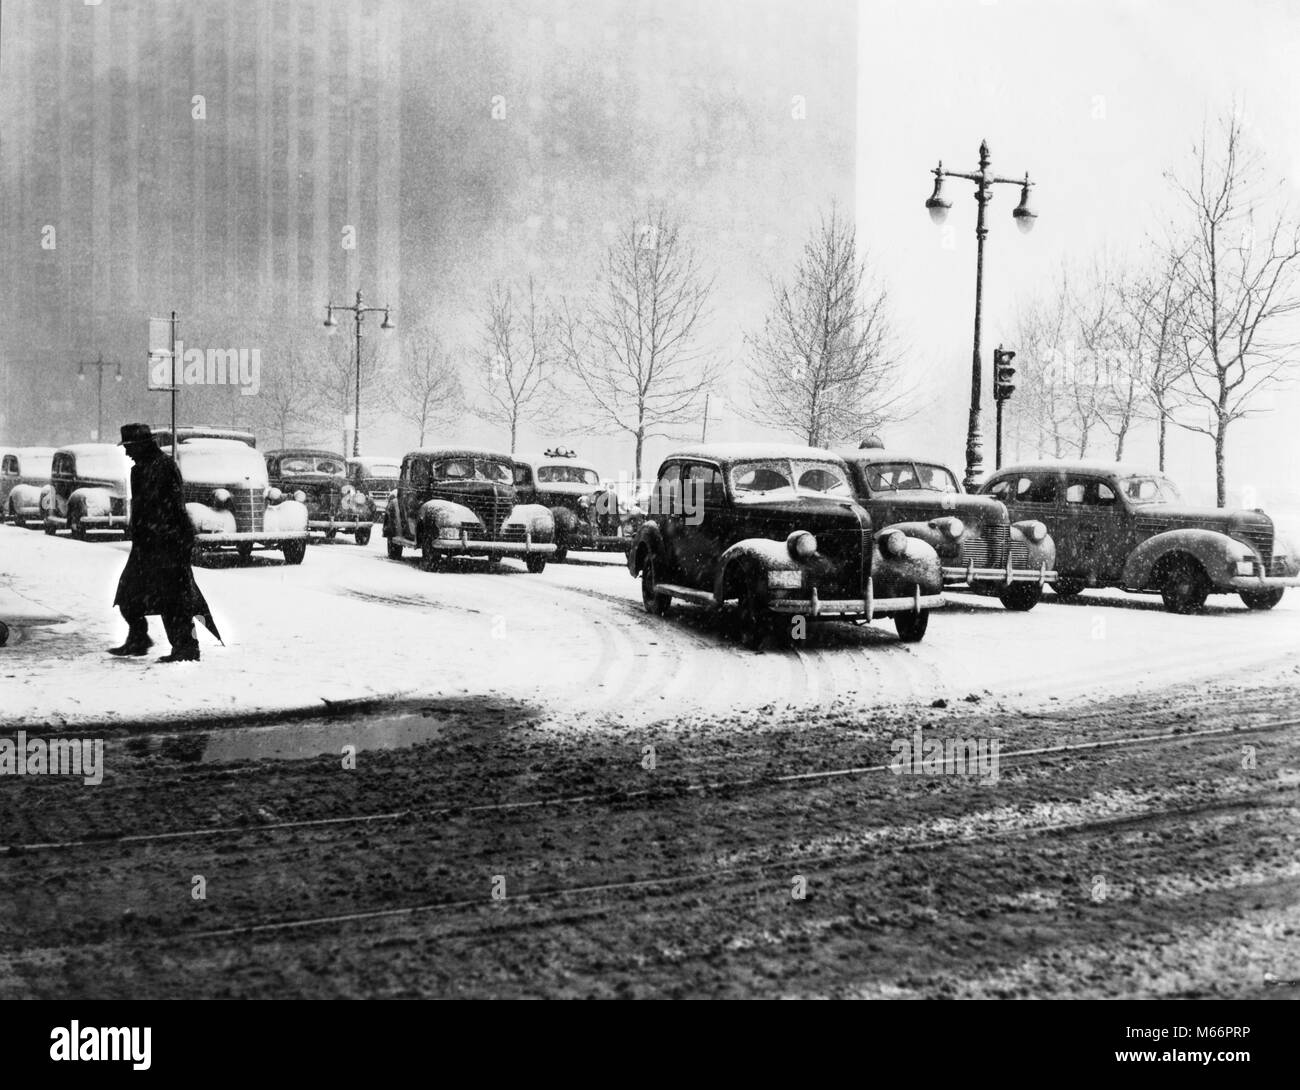 1940s ANONYMOUS SILHOUETTED PEDESTRIAN CROSSING CITY STREET IN WINTER WITH SNOW ON ROAD AND CAR TRAFFIC NYC NEW YORK USA - t762 HAR001 HARS 30-35 YEARS 35-40 YEARS 40-45 YEARS WINTER SEASON PEDESTRIAN URBAN CENTER SILHOUETTED AUTOS GOTHAM NYC SLUSH NEW YORK SEASON AUTOMOBILES CITIES MOBILITY VEHICLES WALKER NEW YORK CITY ANONYMOUS MID-ADULT MID-ADULT MAN B&W BLACK AND WHITE OLD FASHIONED PERSONS Stock Photo